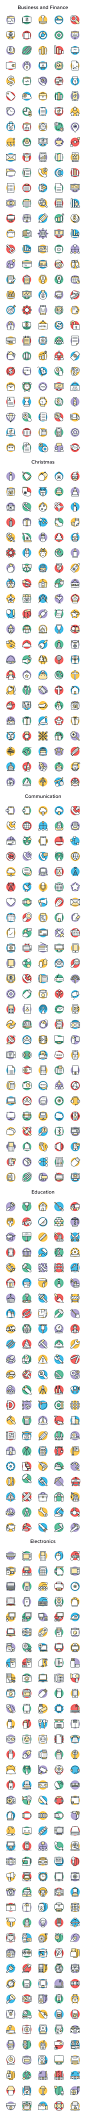 Cool icons2